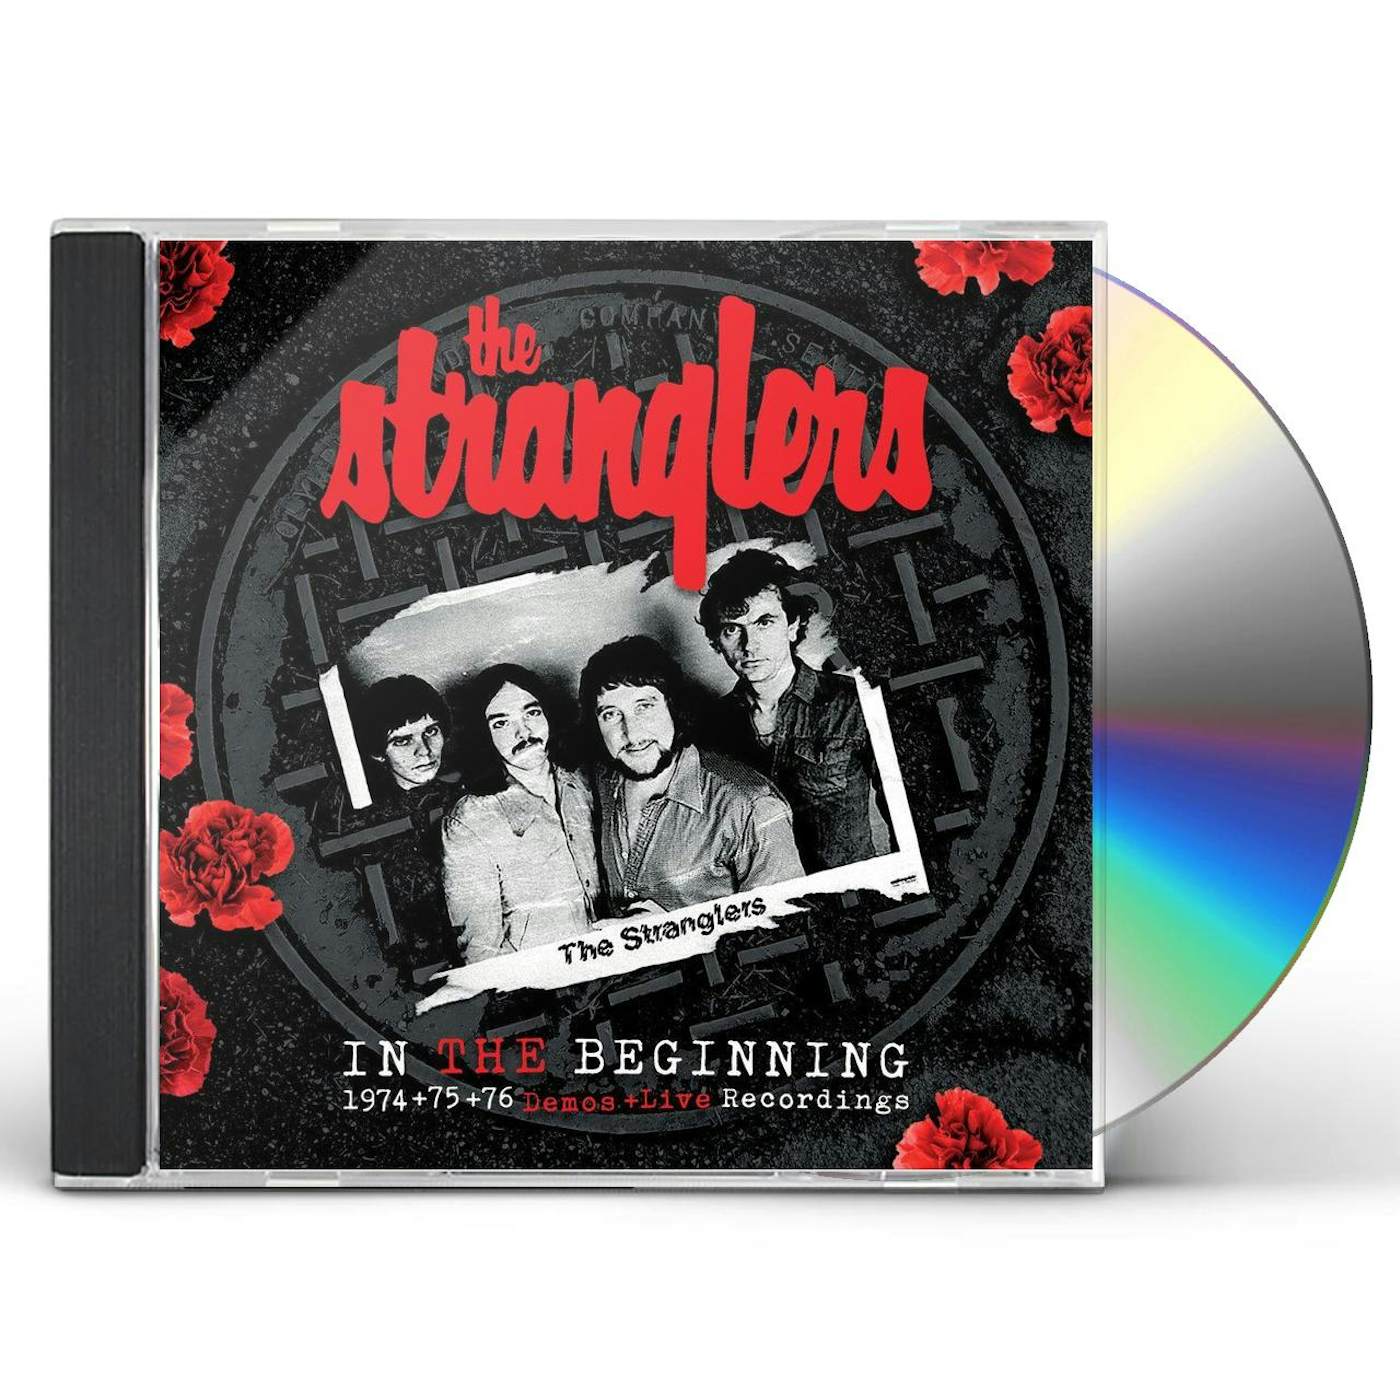 The Stranglers IN THE BEGINNING 1974 75 76 DEMOS + LIVE RECORDING CD